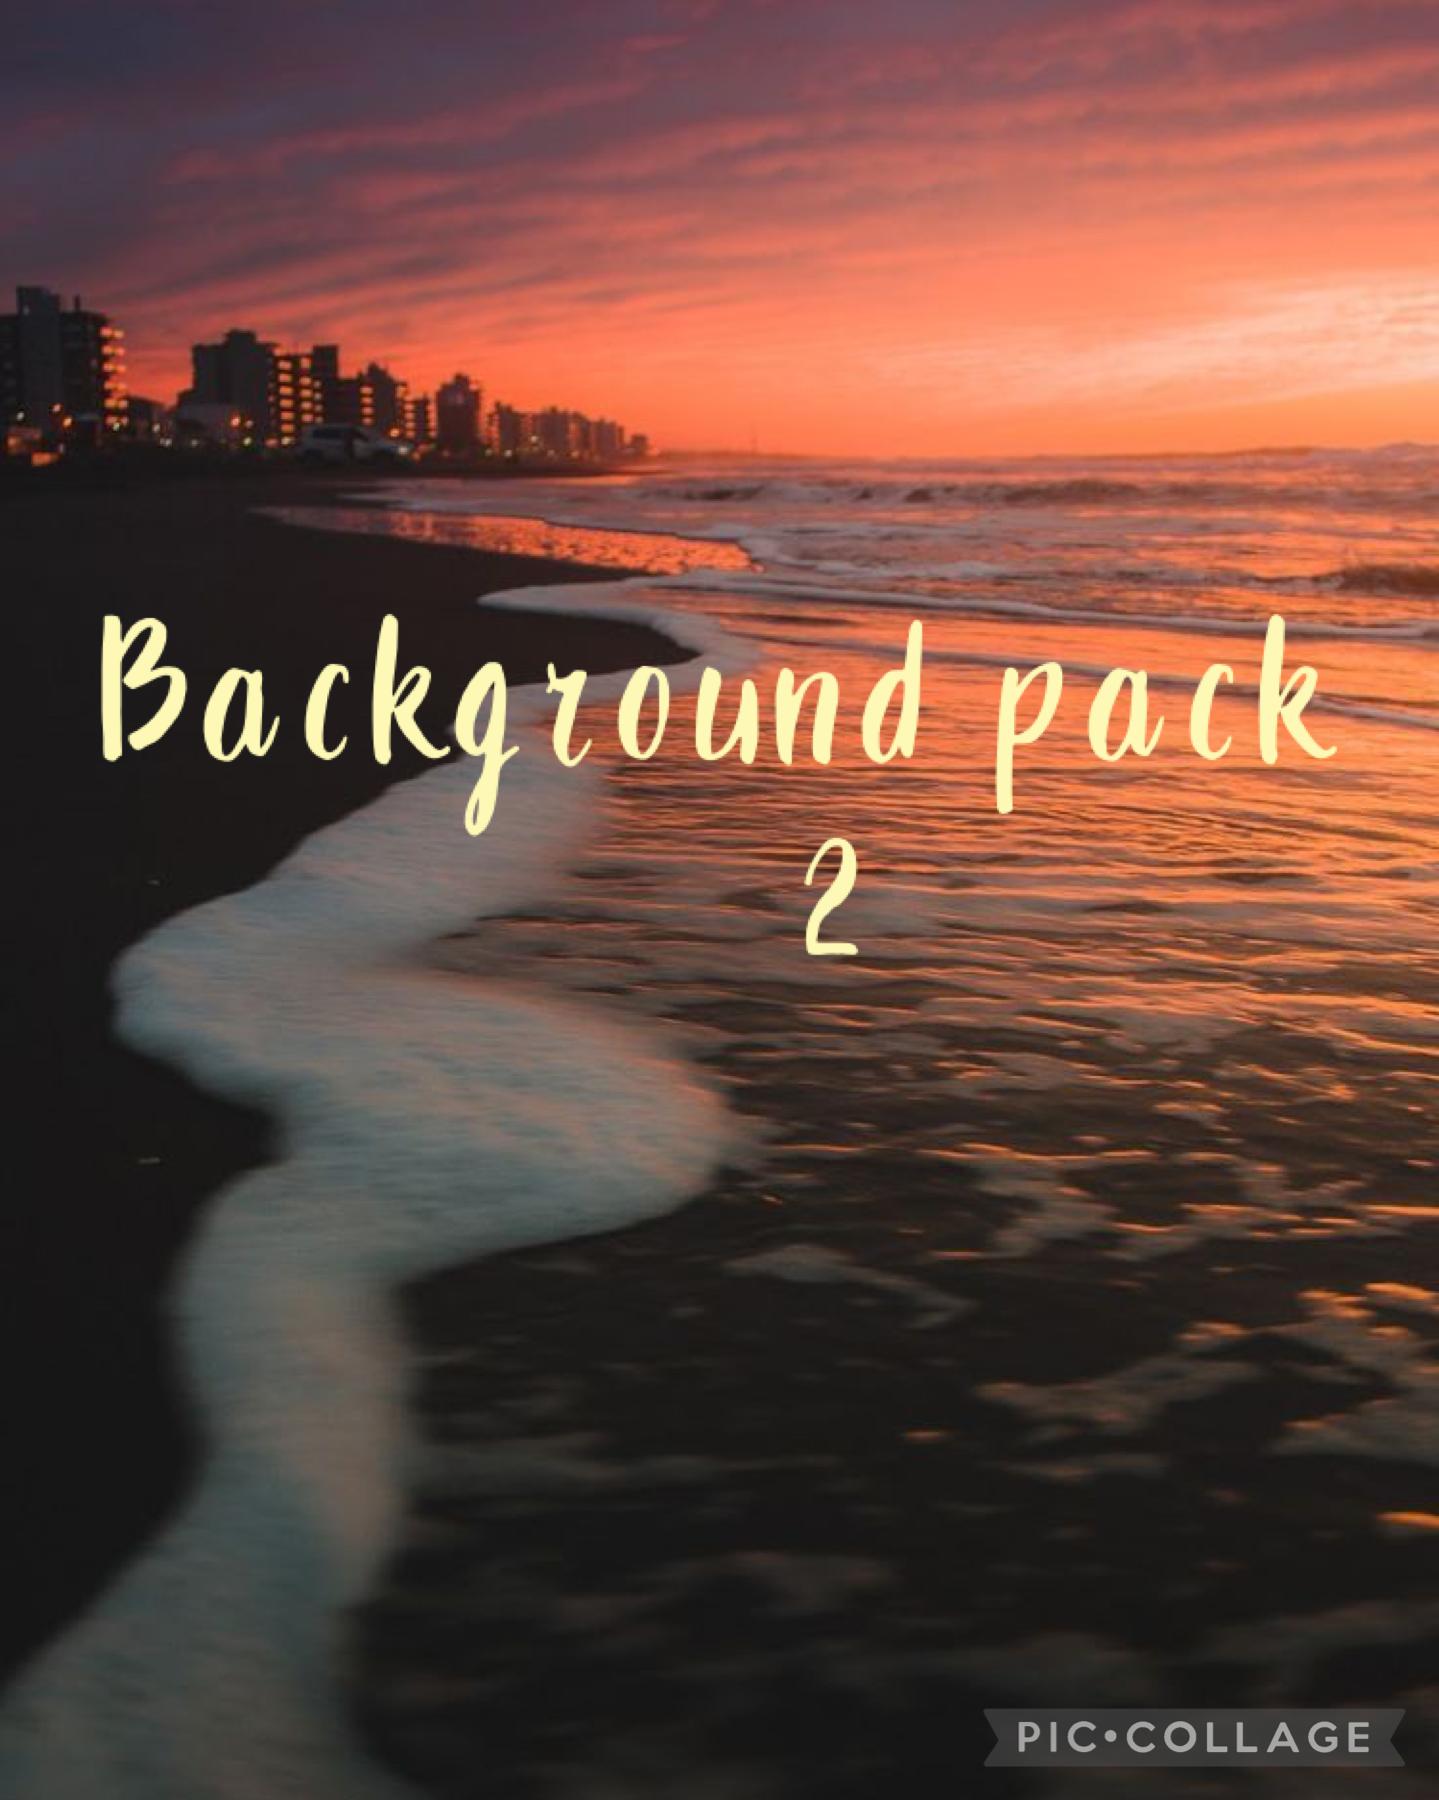 Background pack 2 24.8.21